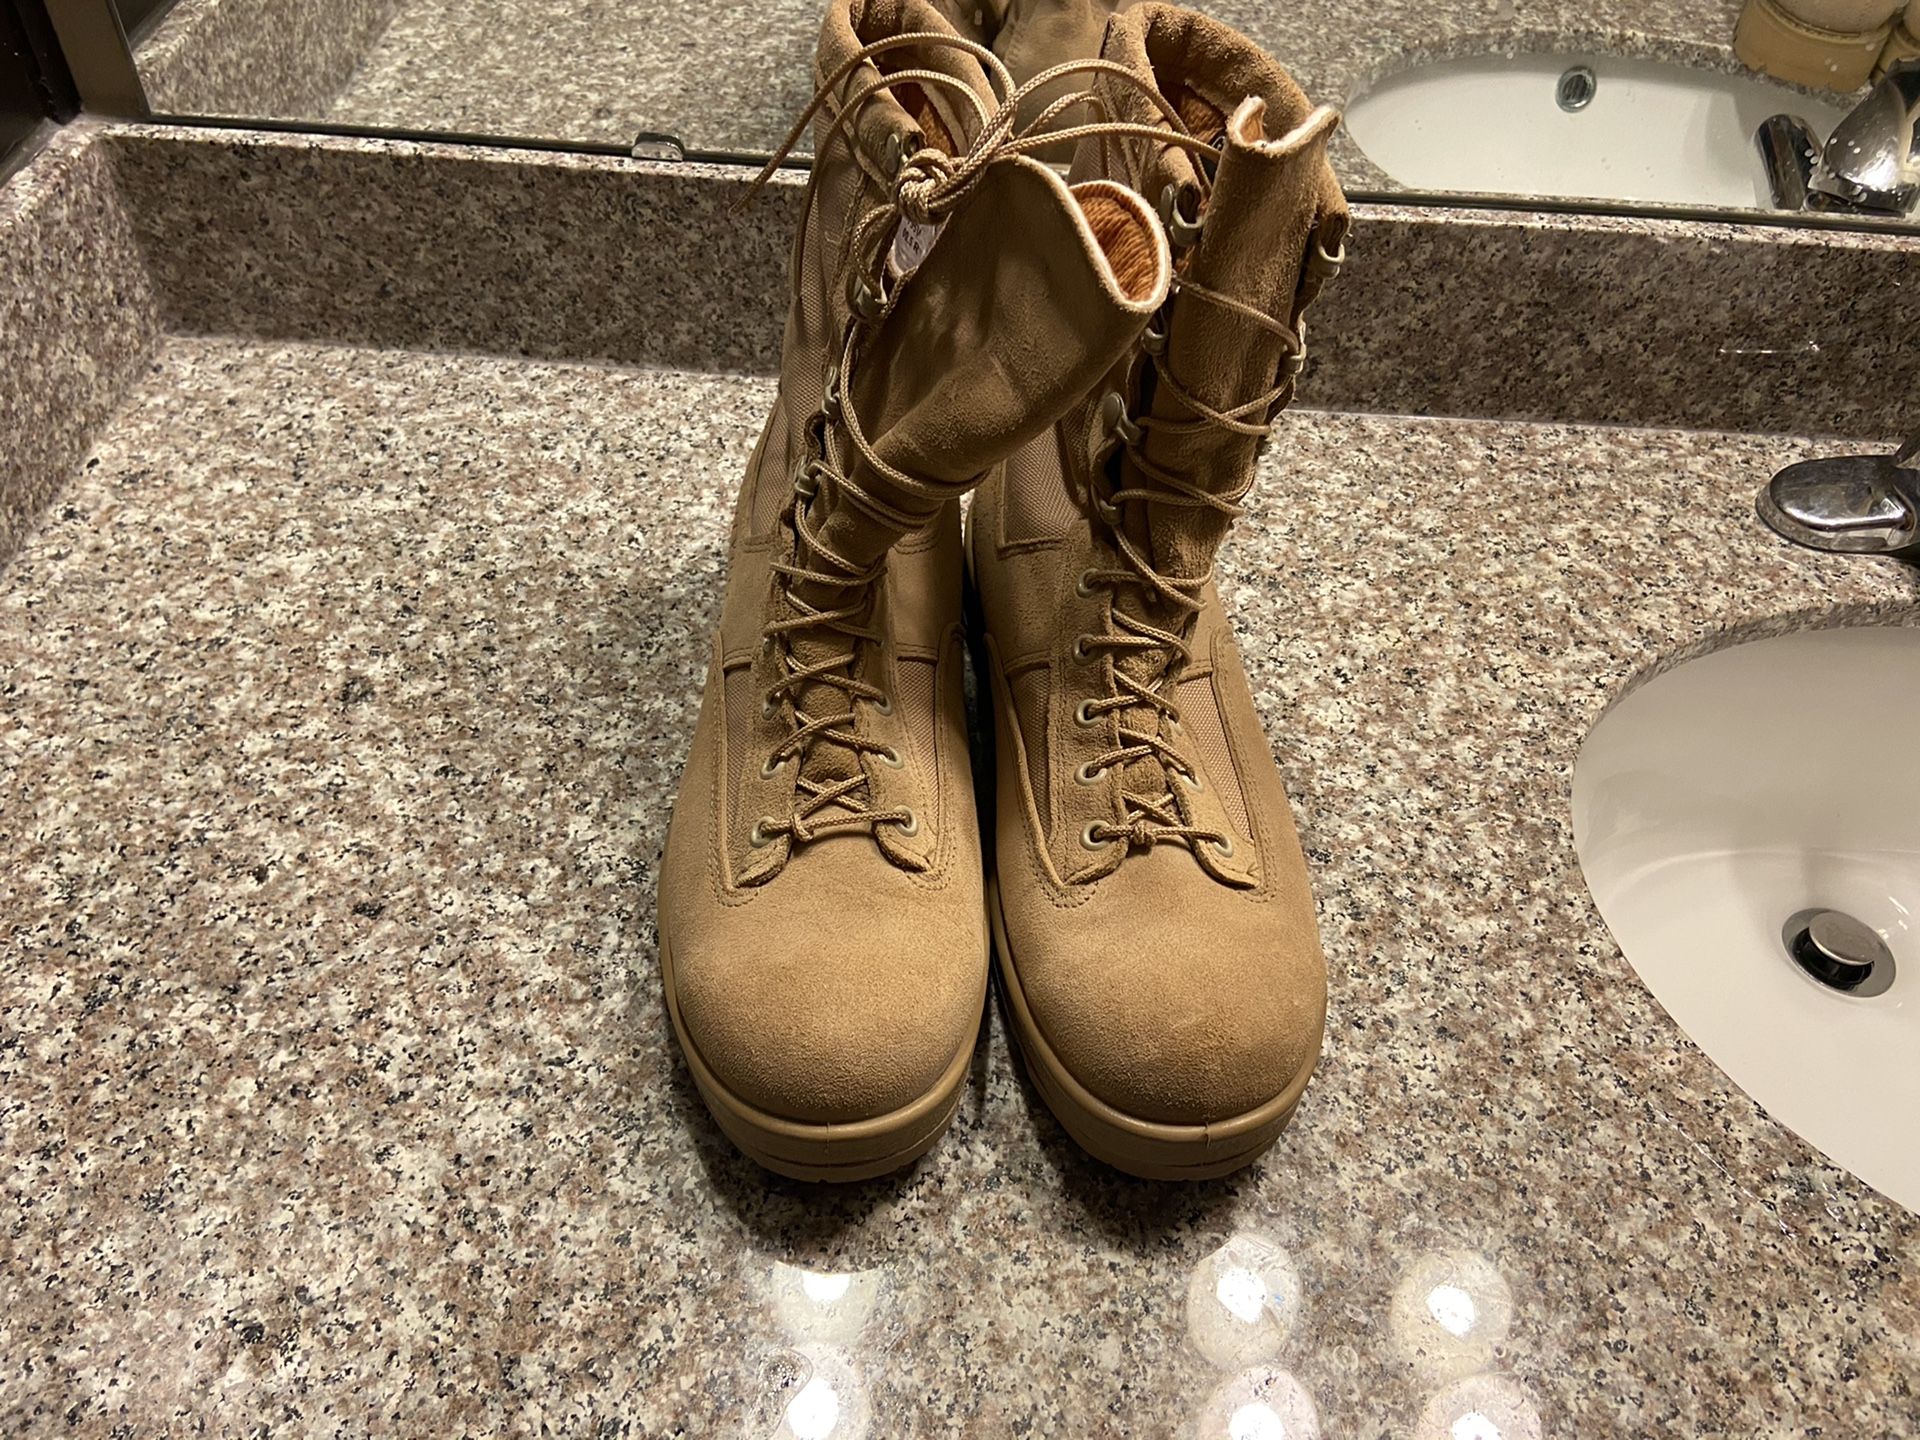 Size 9.5 military boots